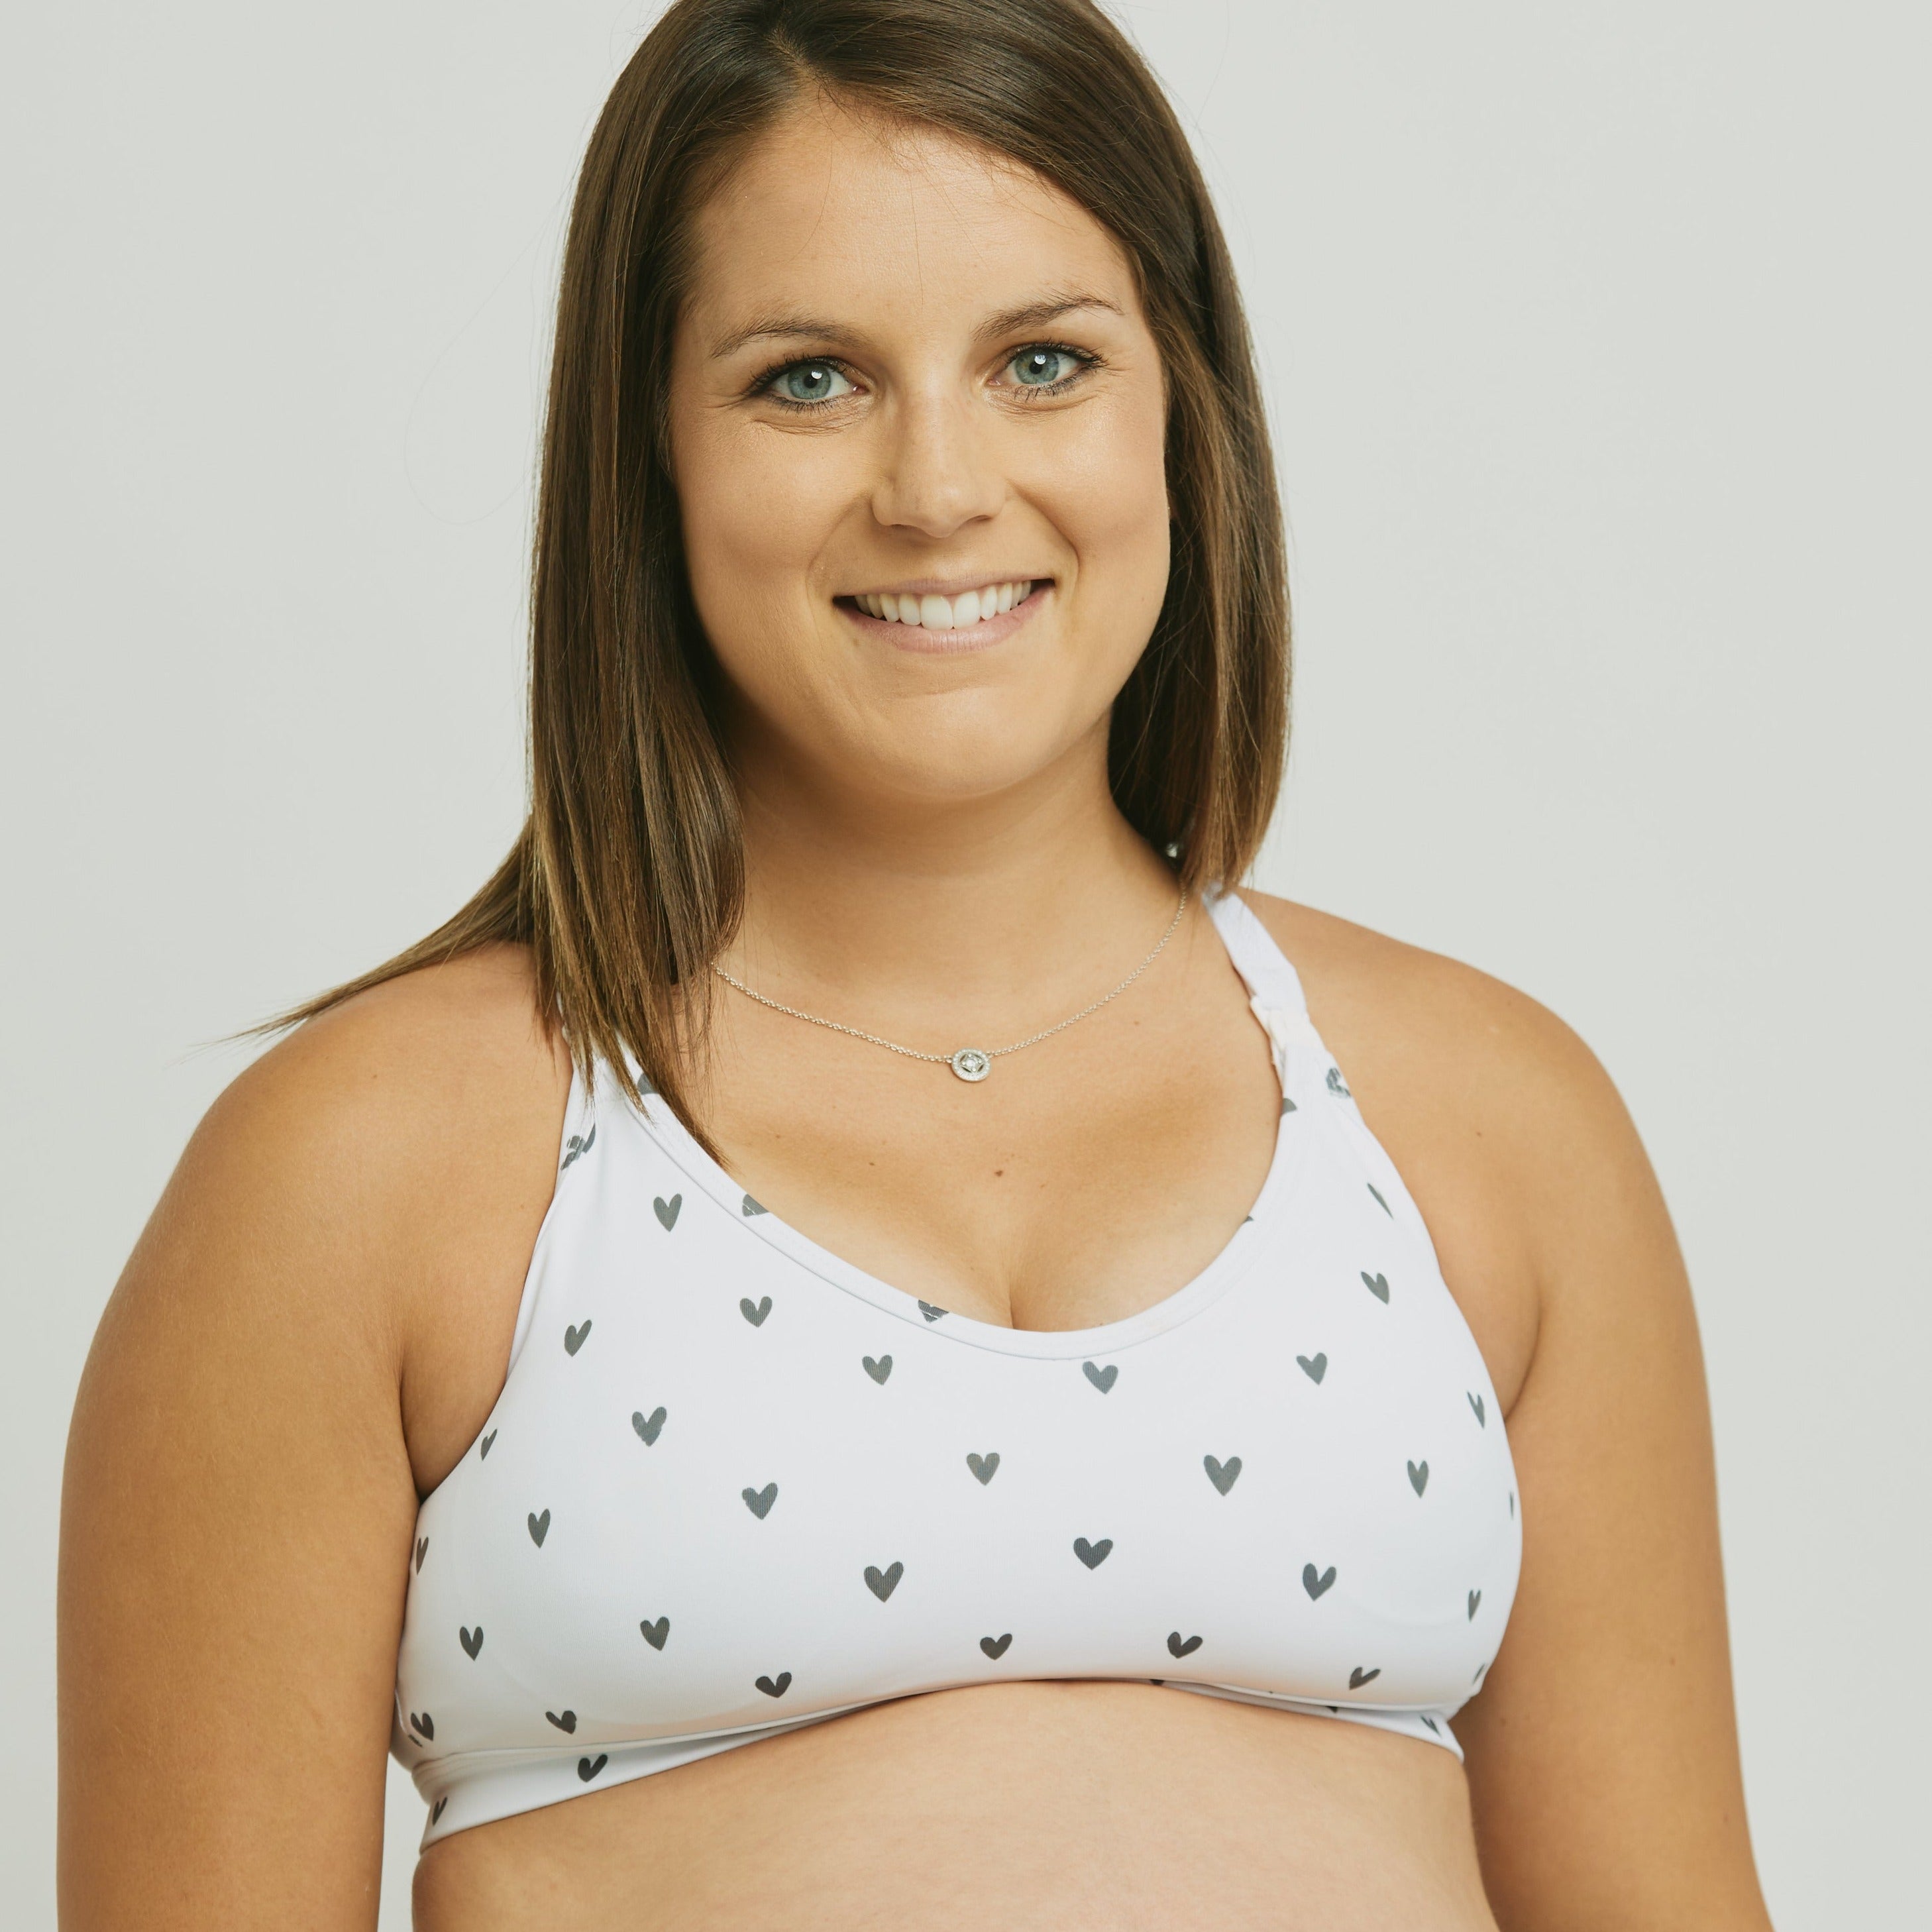 South Beach Maternity nursing mid support sports bra in frosty green, ASOS